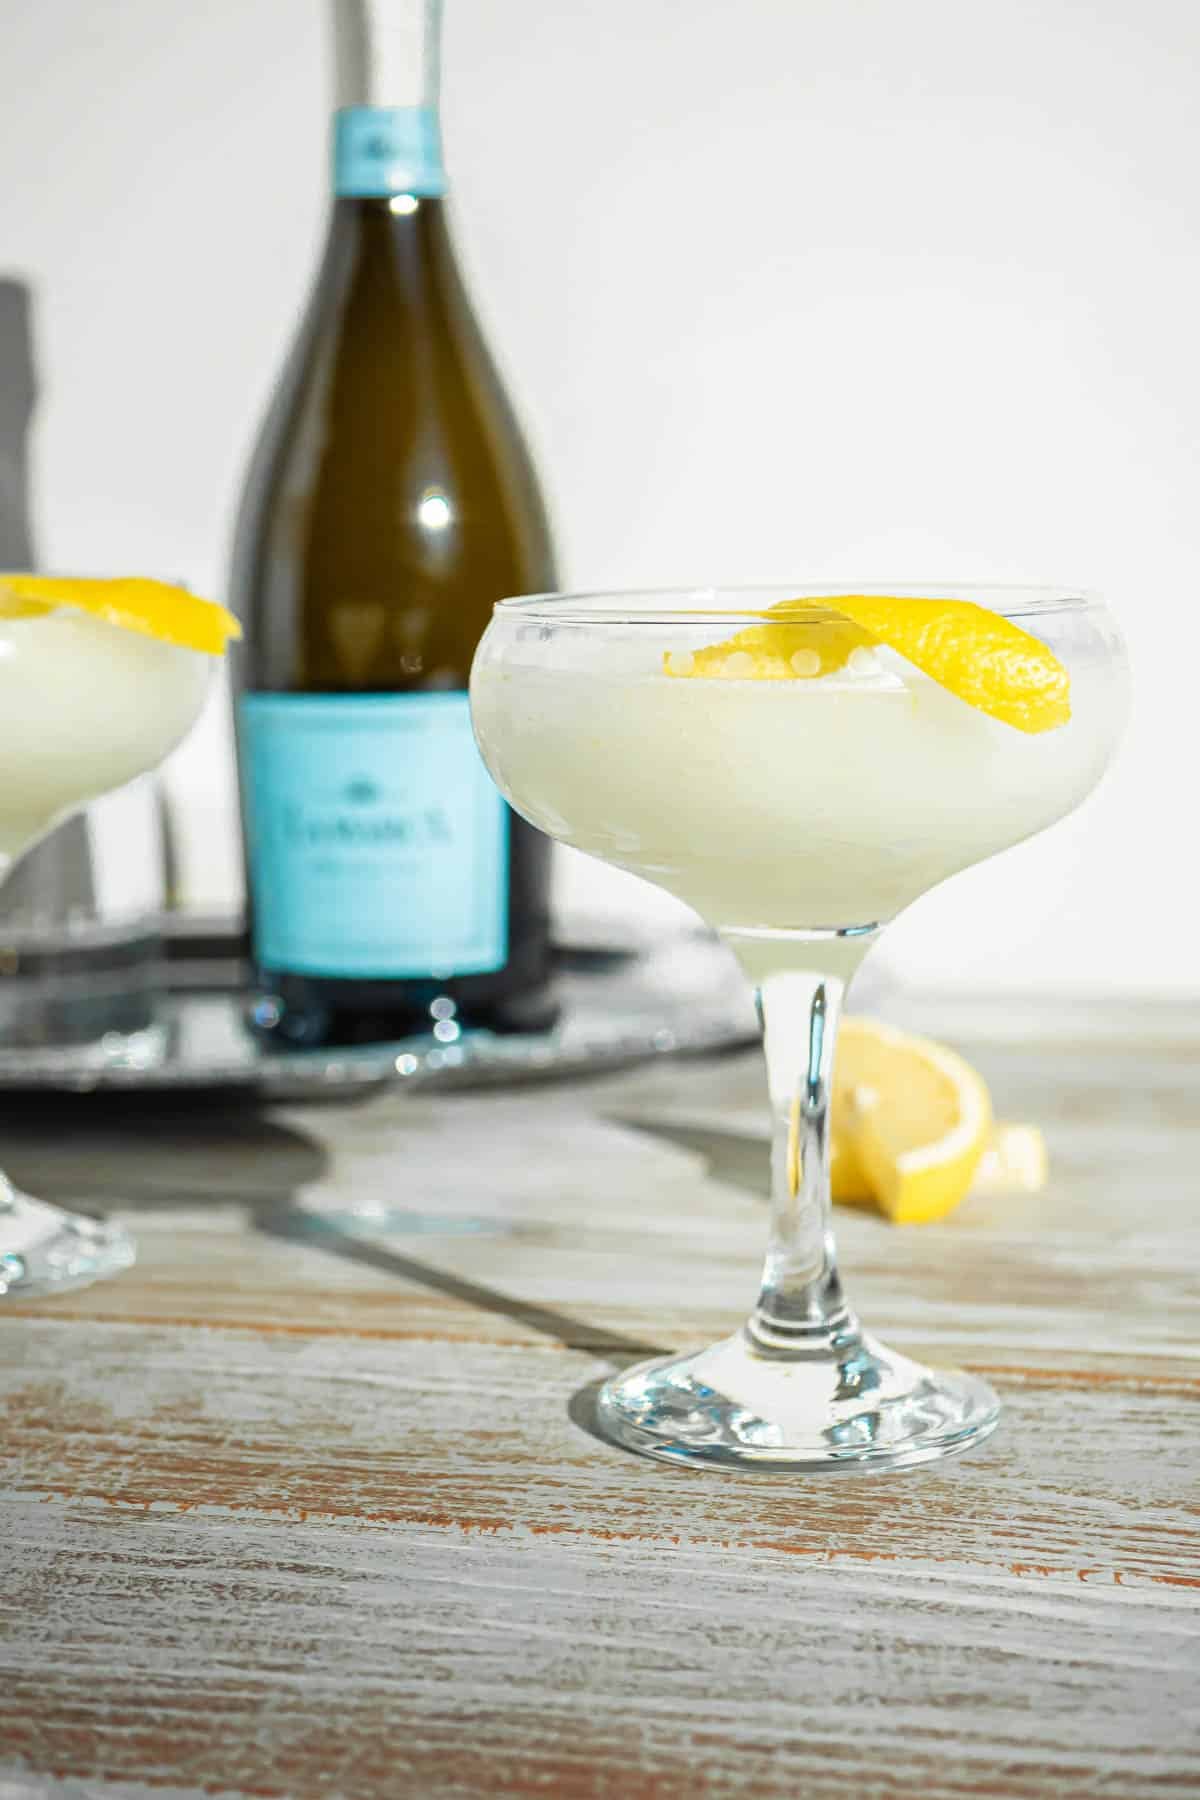 a sgroppino prosecco cocktail garnished with a lemon peel in front of a tray with a bottle of prosecco.